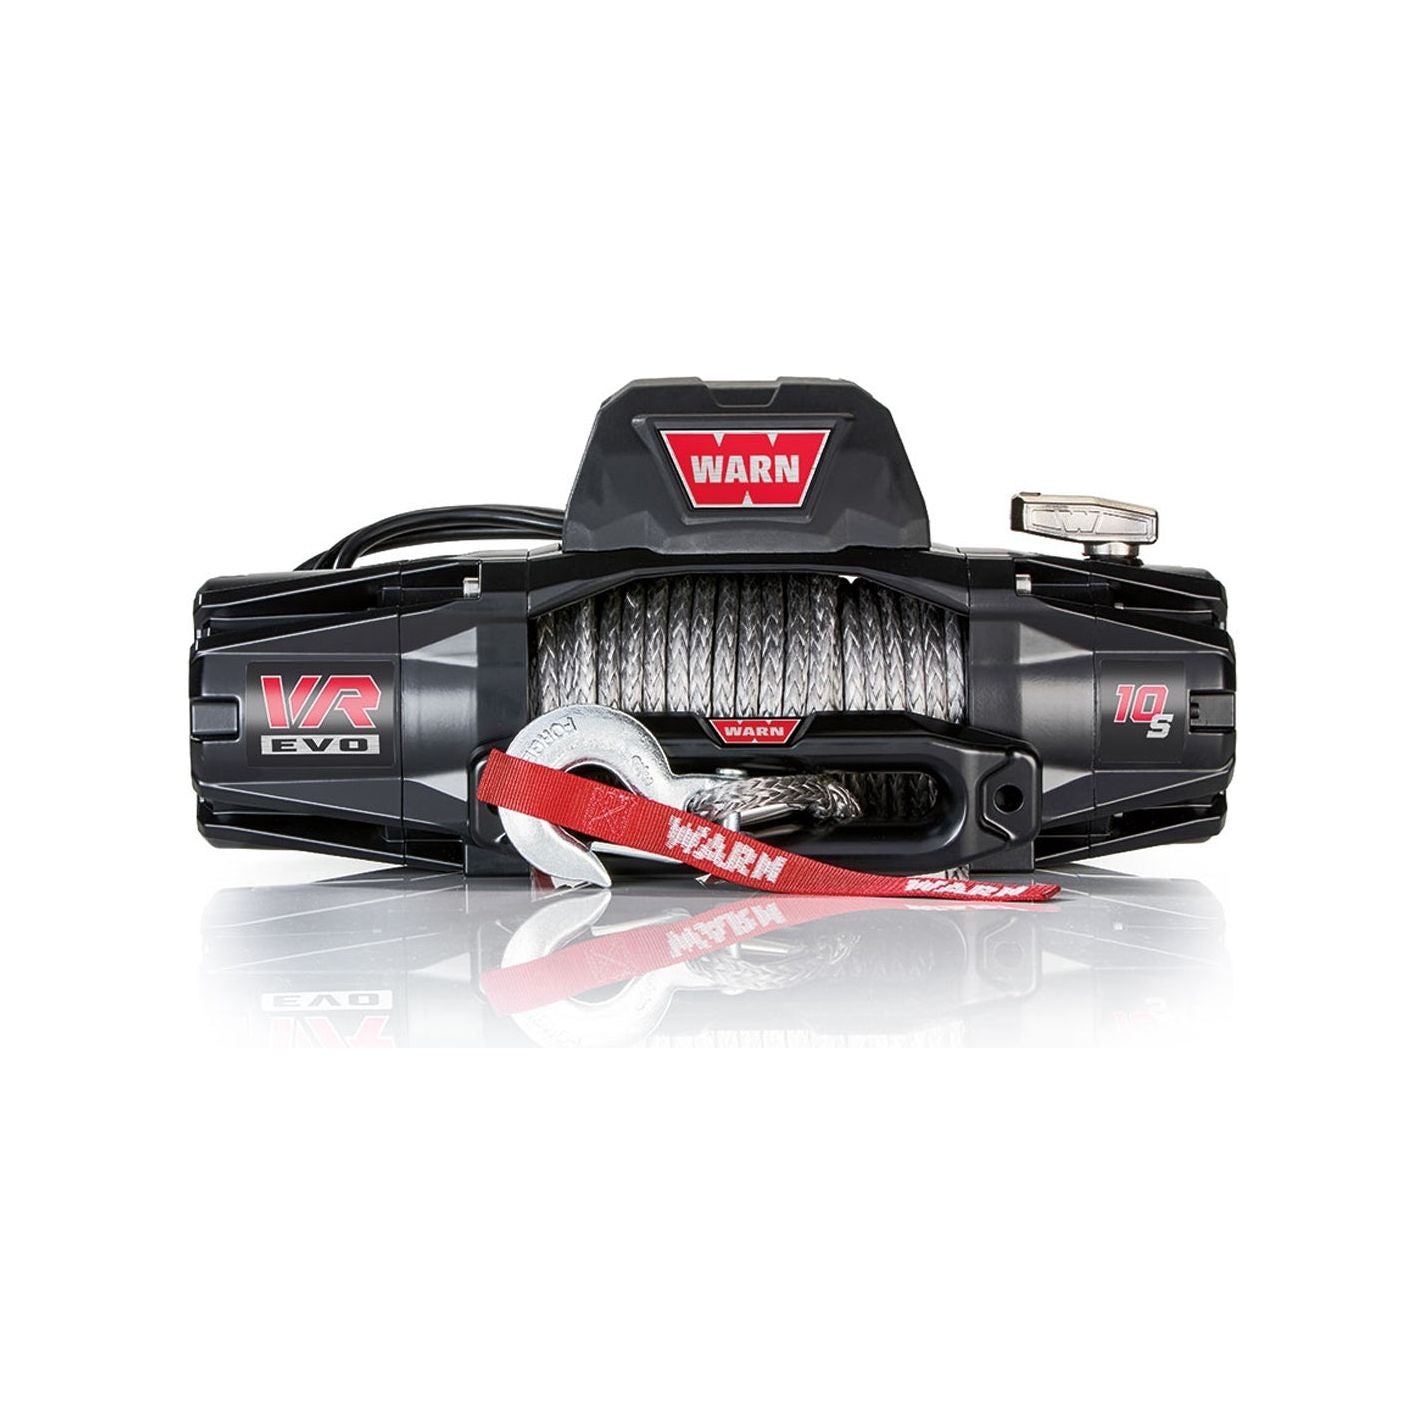 WARN 103253 - VR EVO 10-S Winch 10000# Synthetic Rope